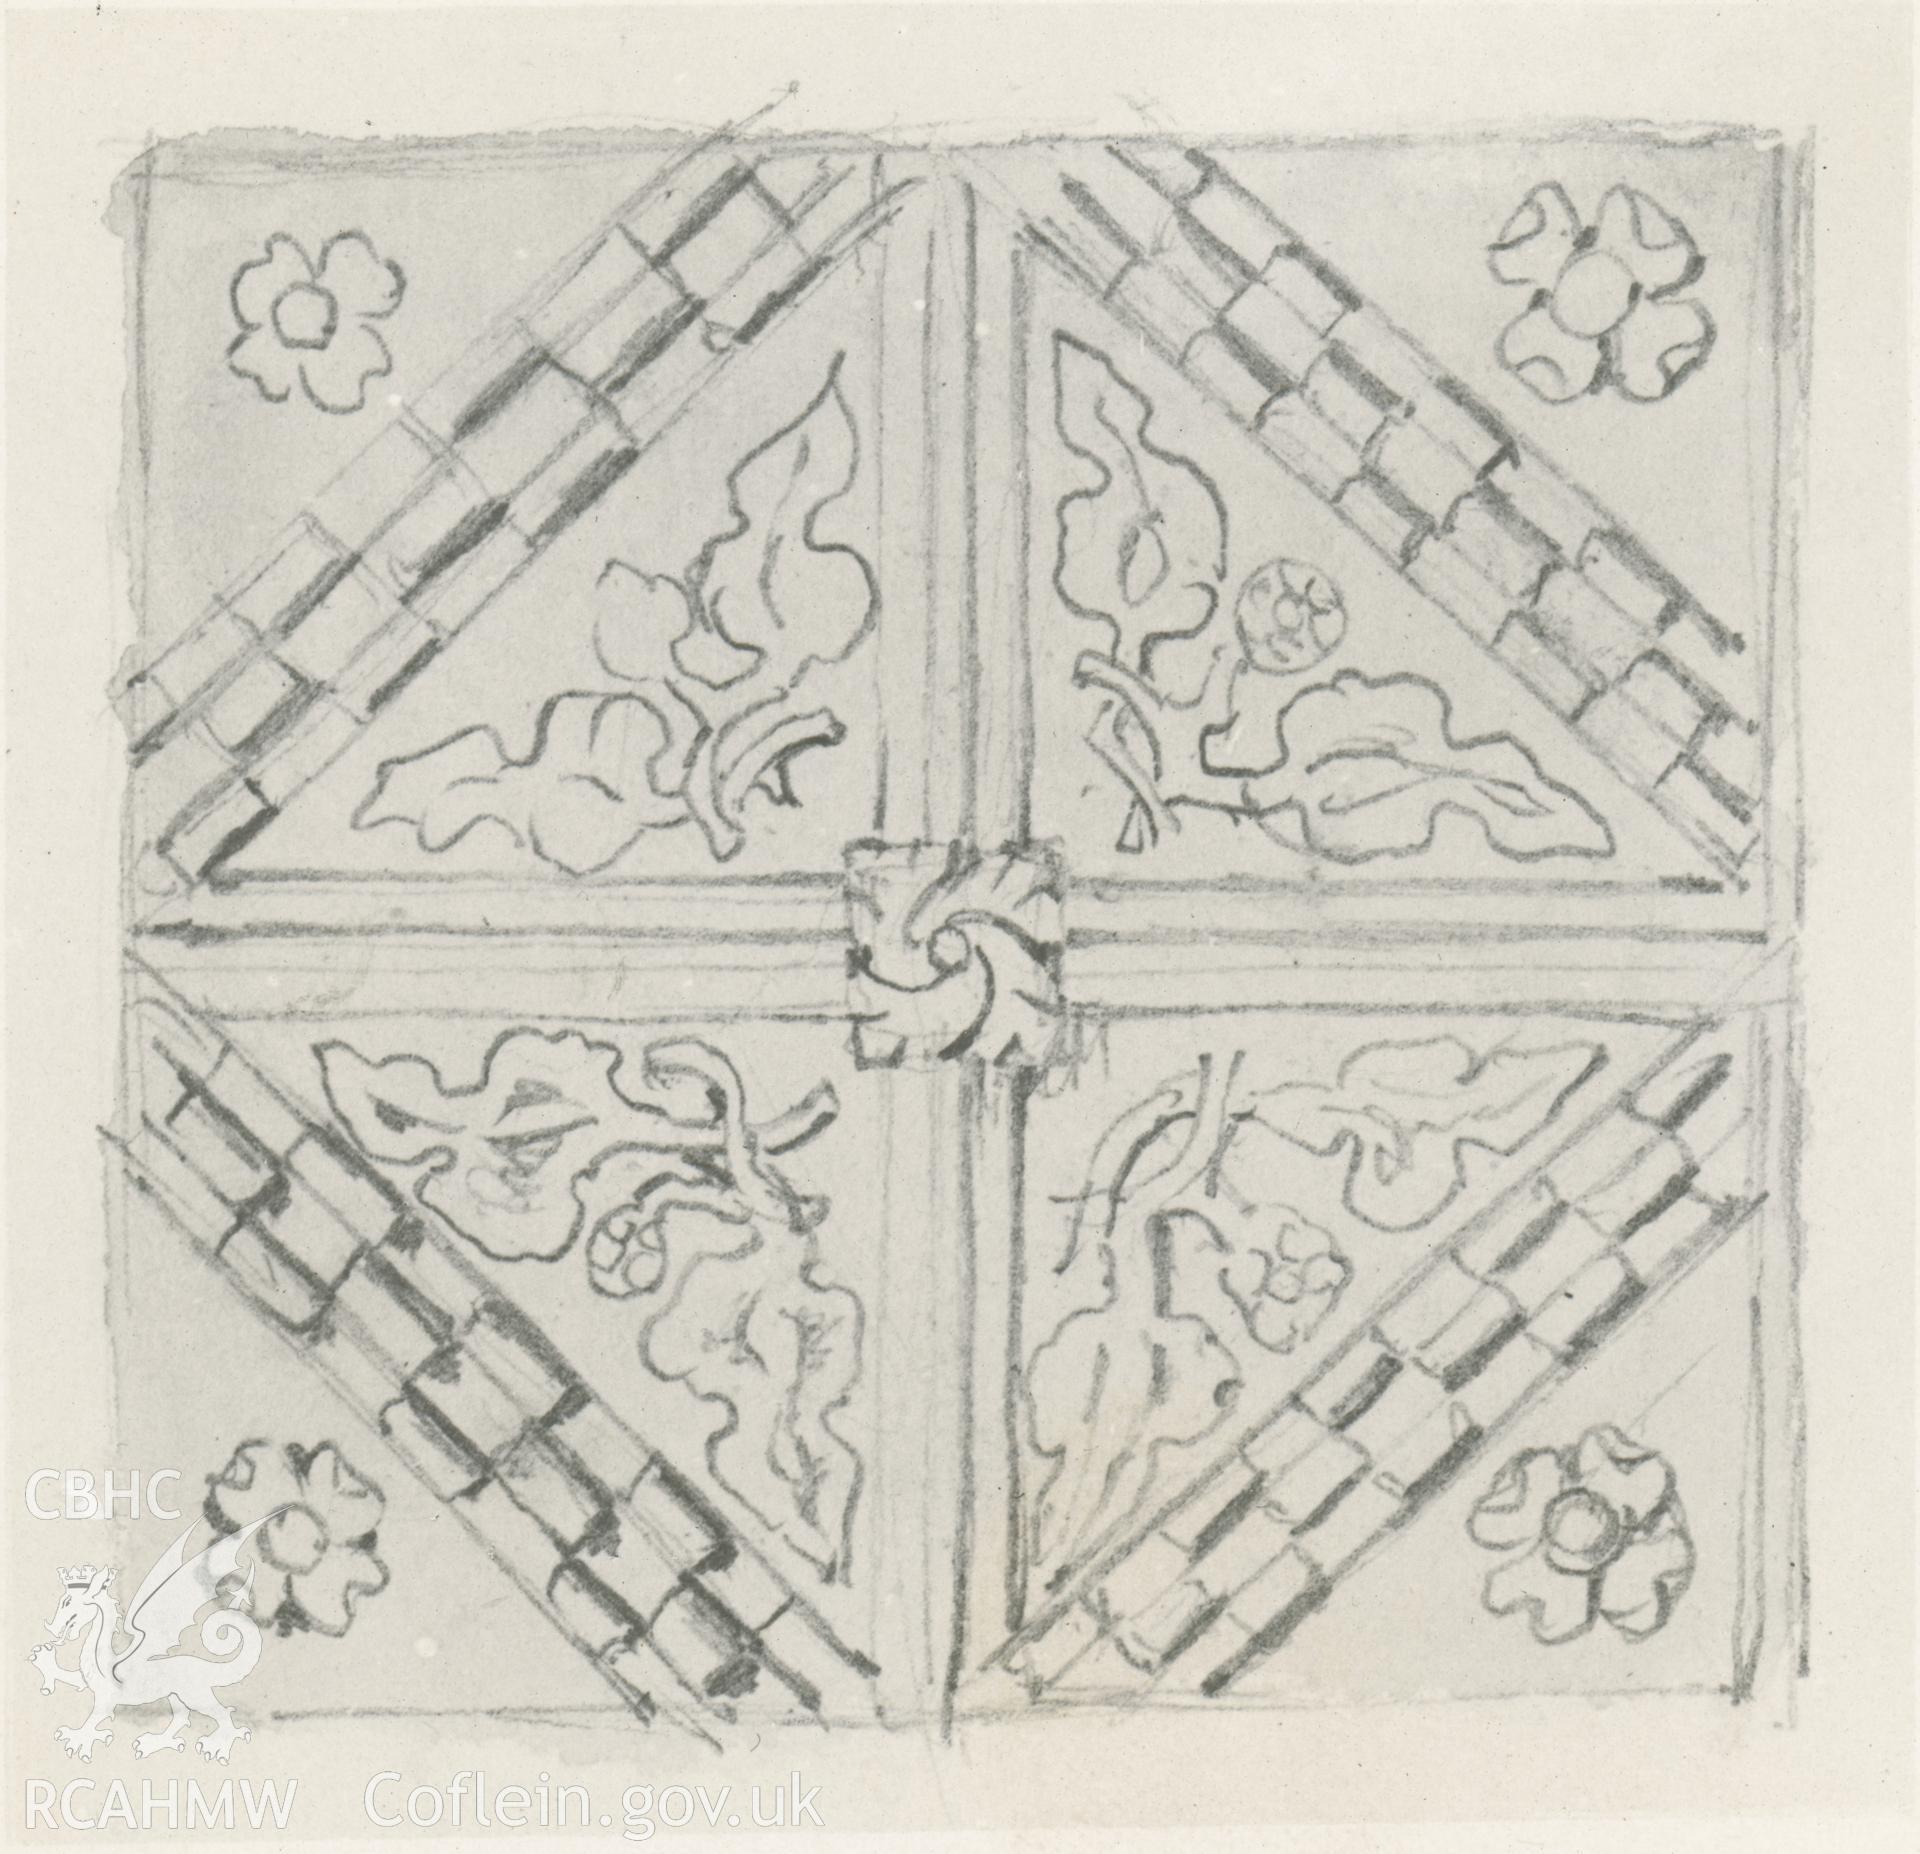 Photograp by Macbeth of an early pencil sketch showing tile from Valle Crucis Abbey.